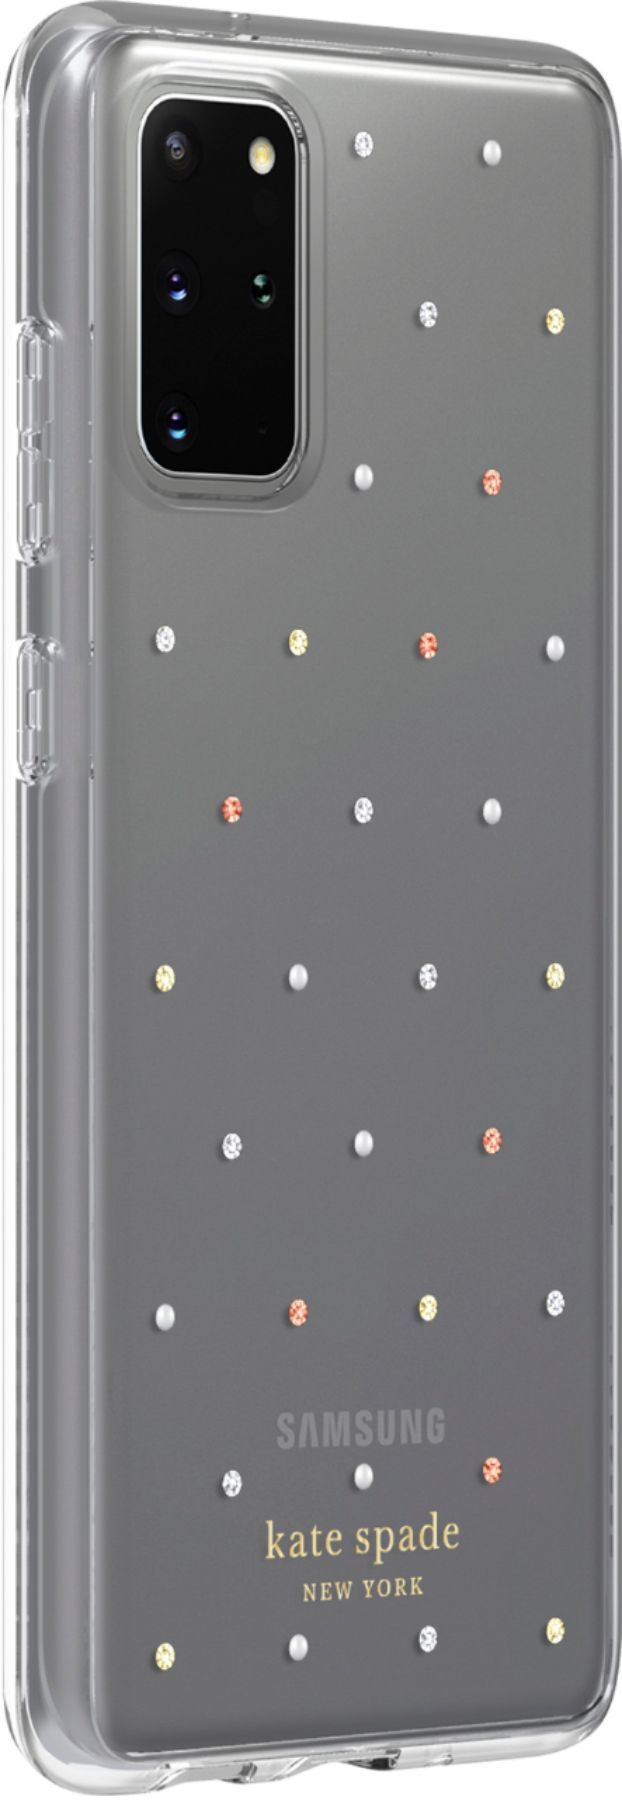 Angle View: kate spade new york - Protective Hard-Shell Case for Samsung Galaxy S20+ 5G - Pin Dot Gems/Pearls/Clear